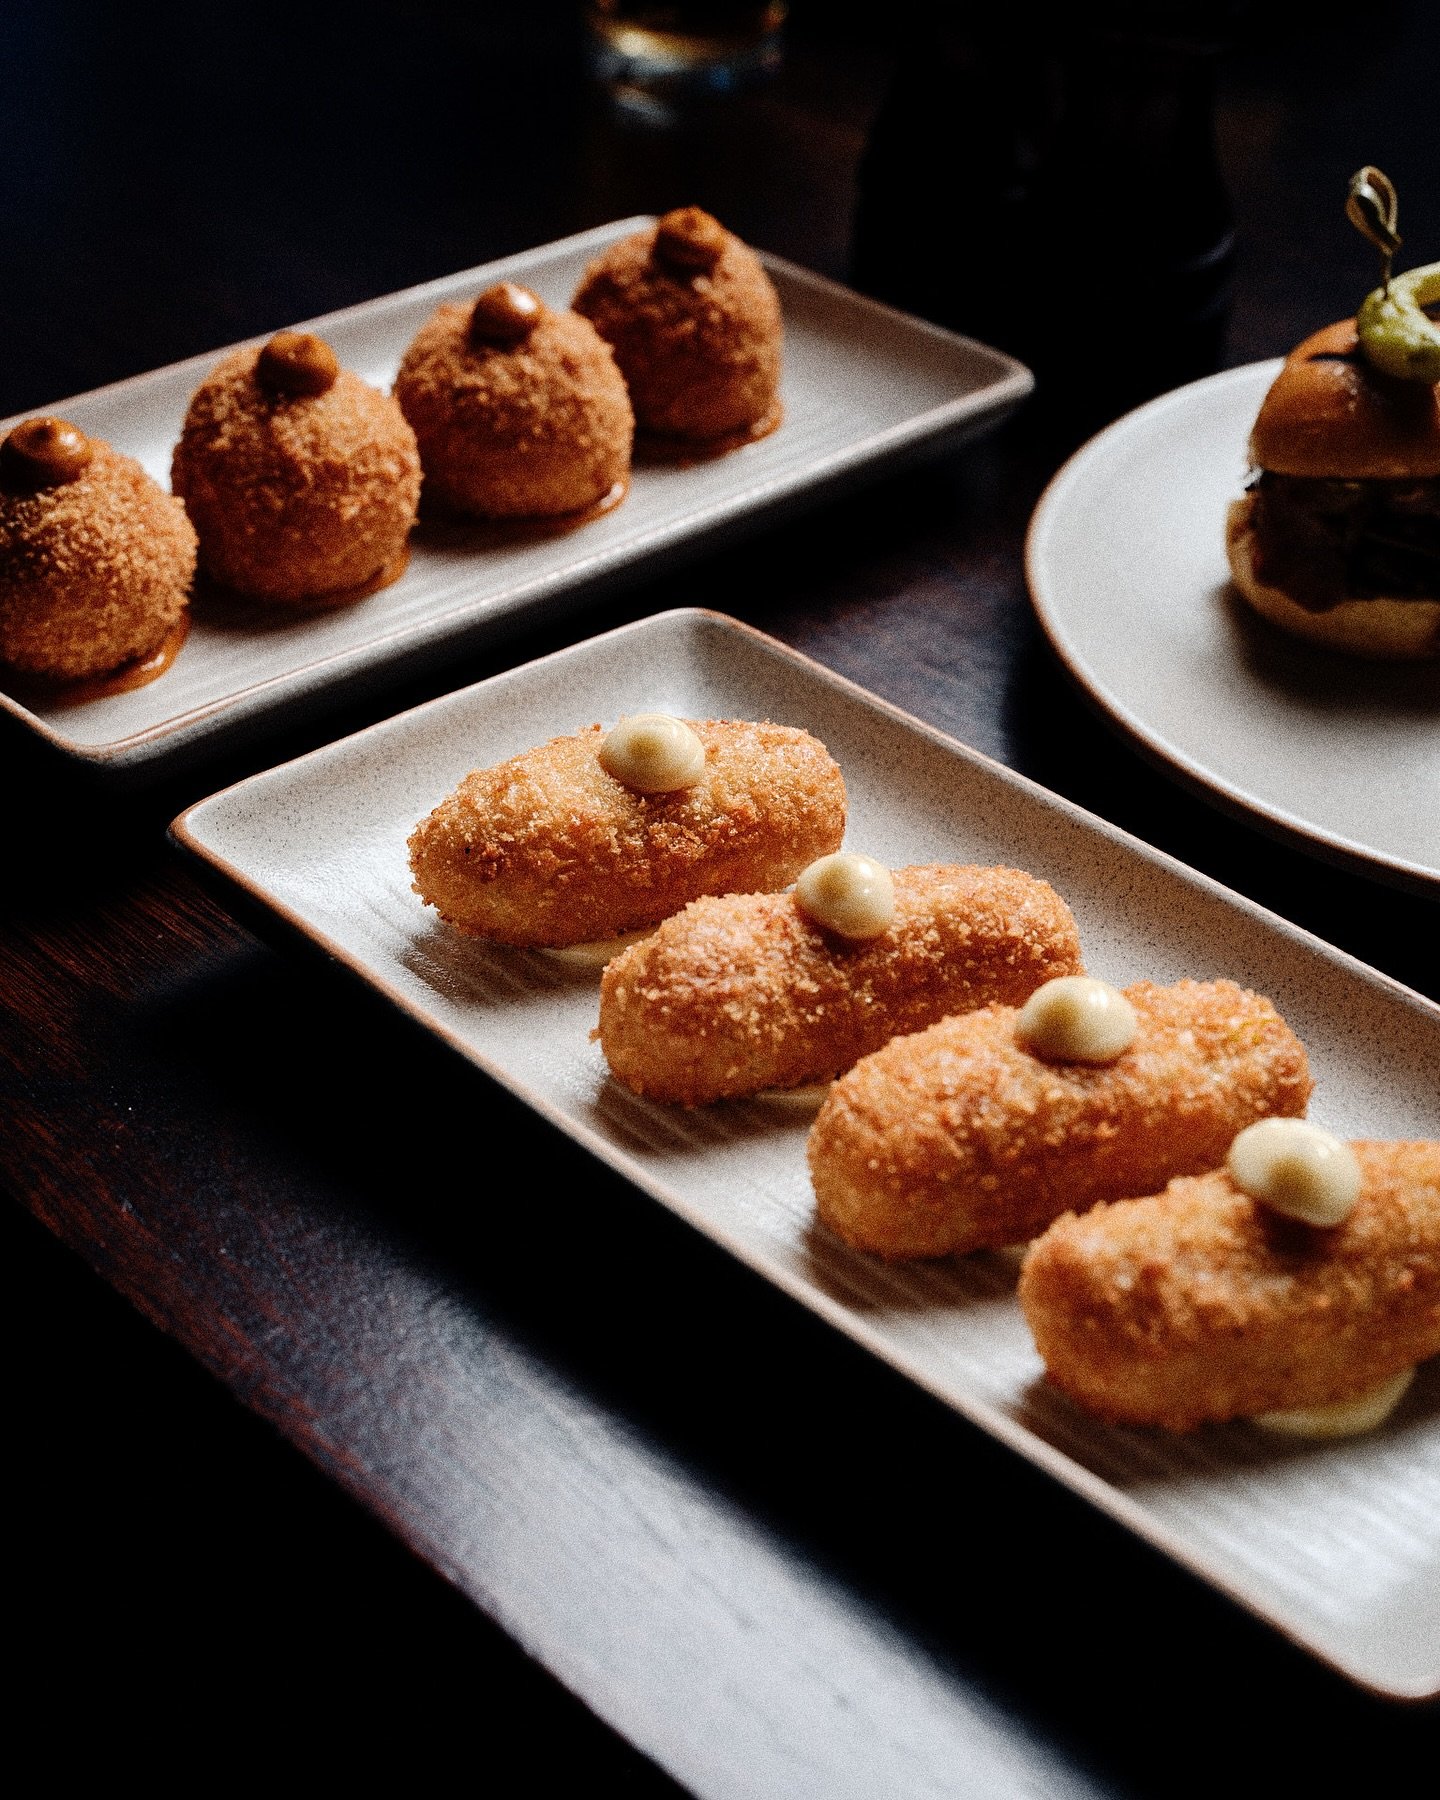 Tasty little locally sourced numbers you&rsquo;ll find in the bistro at the Border Inn Hotel: 

Arancini filled with chorizo, pumpkin and cheese w/chipotle aioli

Corn &amp; manchego croquettes, garlic aioli 

Chorizo Sliders: grilled chorizo, inside